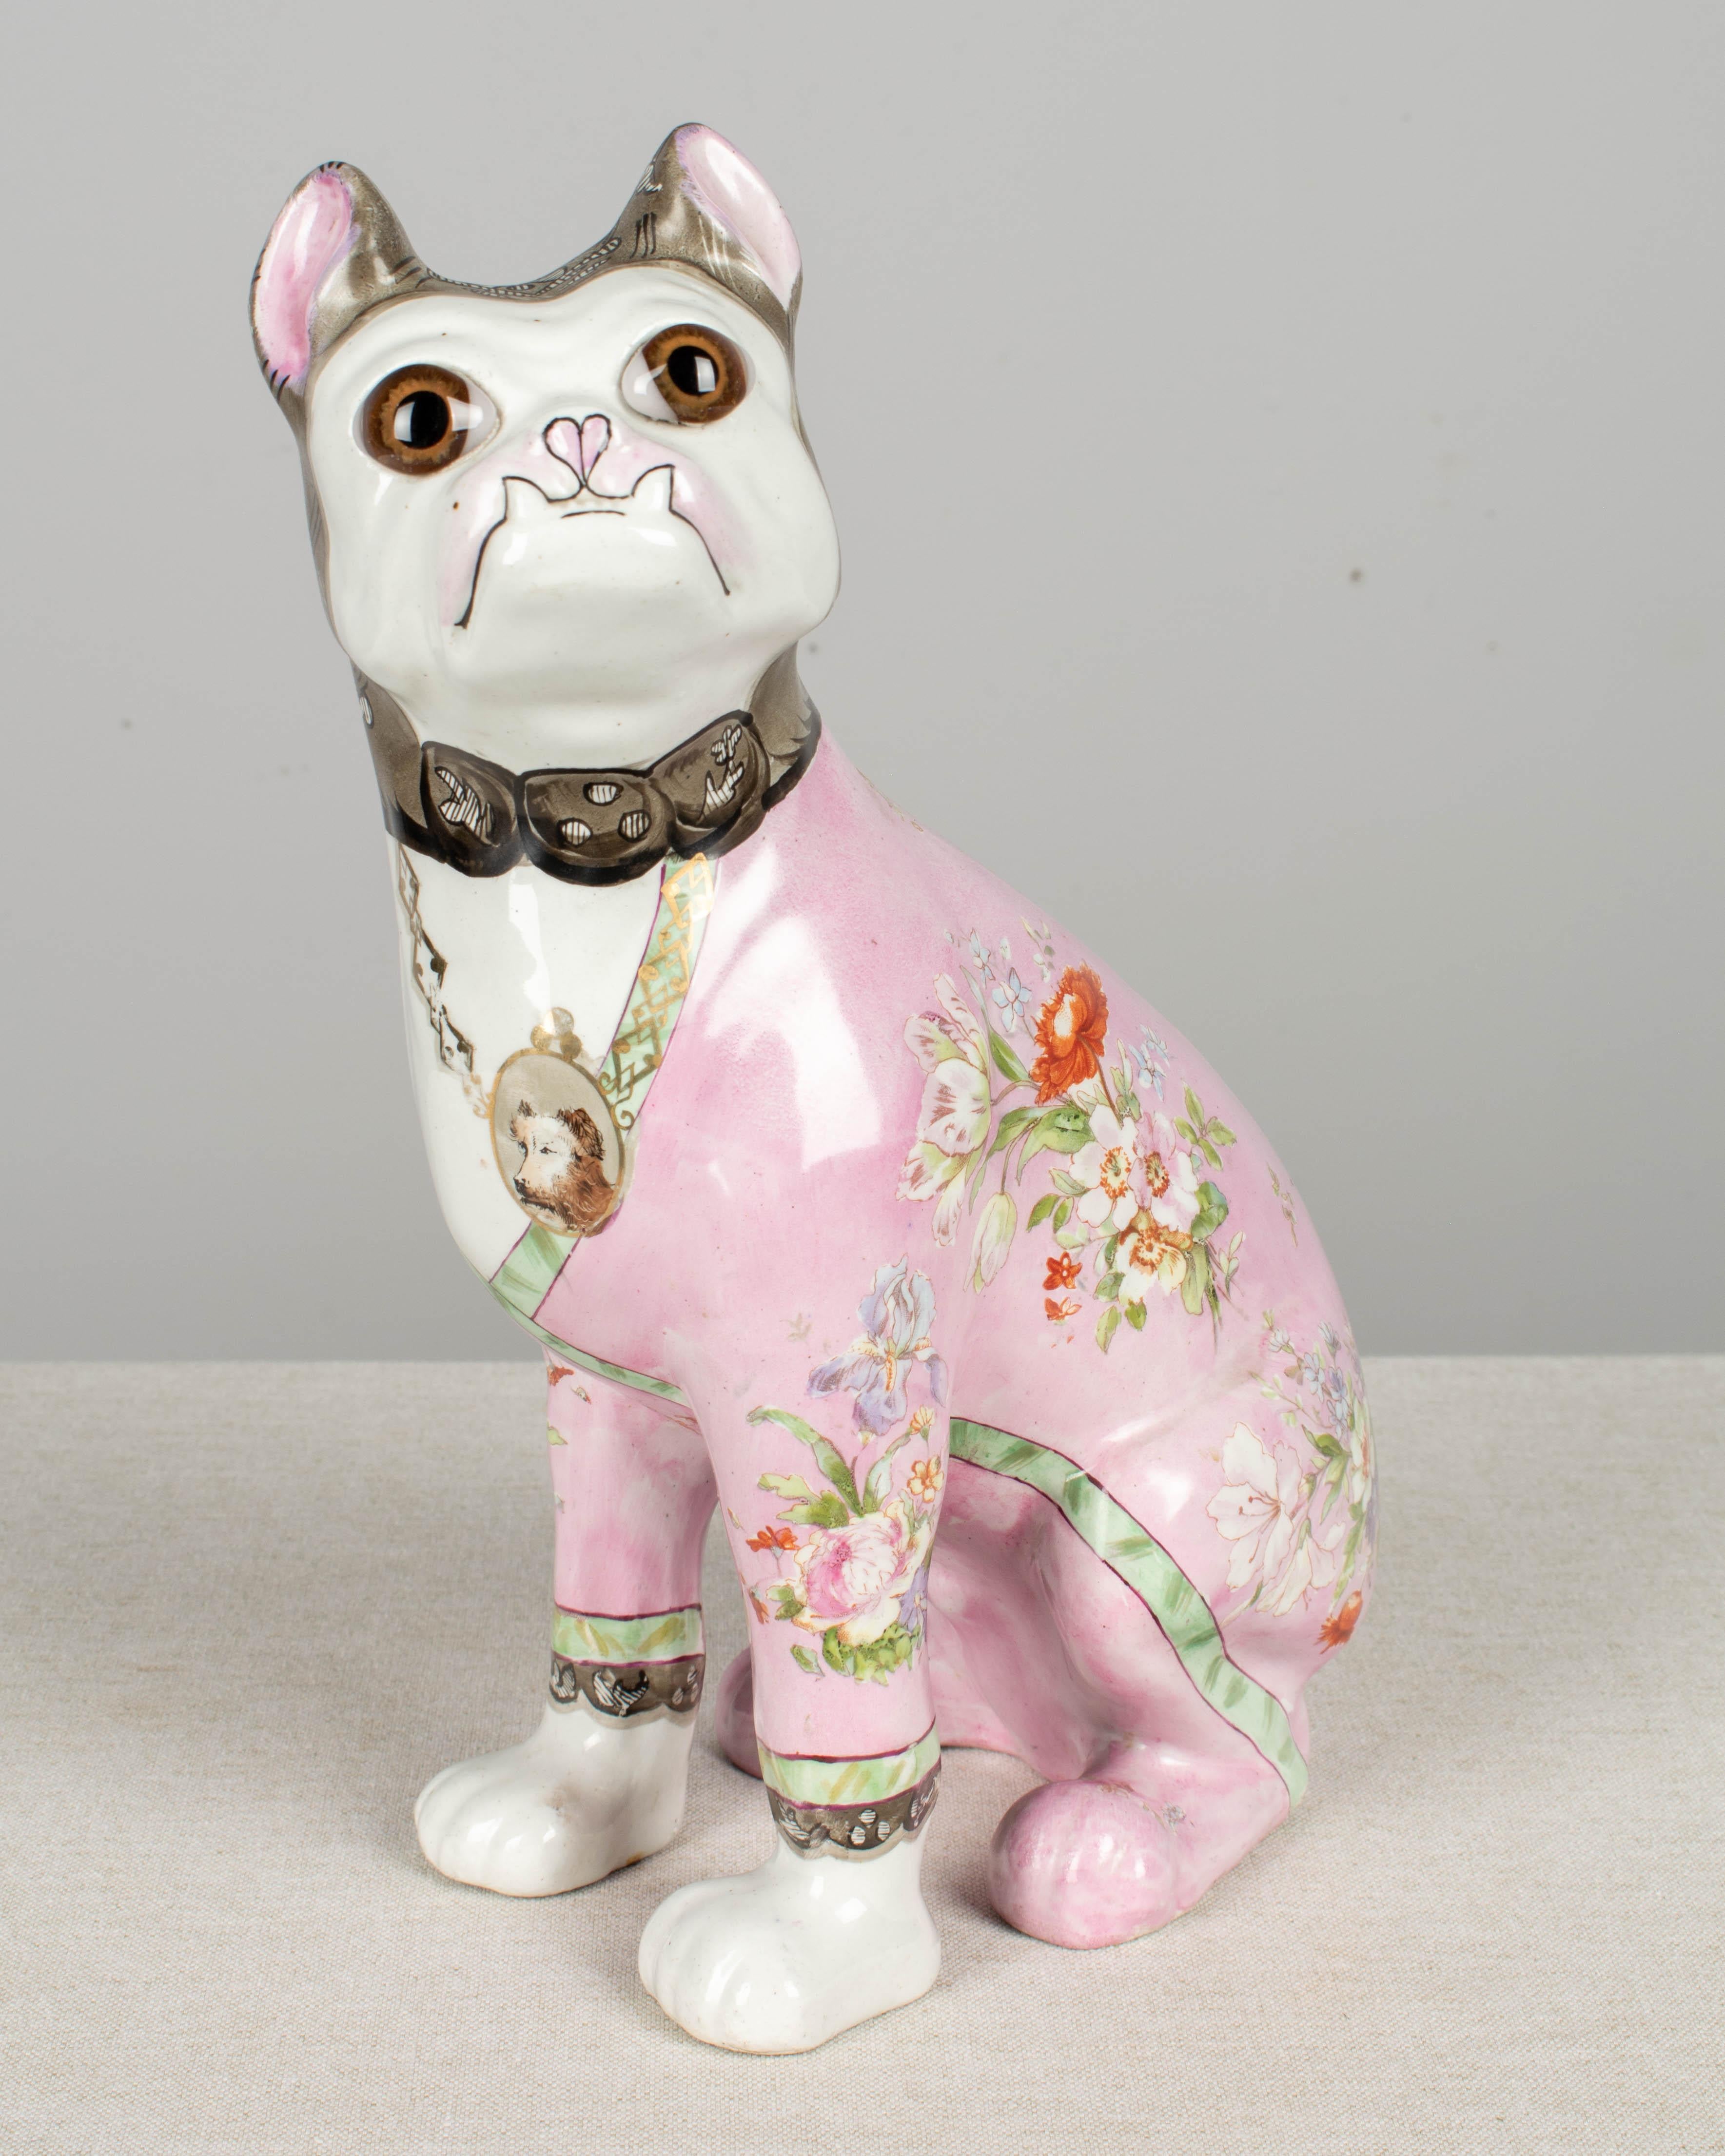 A French faience dog sculpture by Art Nouveau artist Emile Galle (1846-1904). A whimsical ceramic figure of a seated pug or French bulldog, with glass eyes, hand painted with ornate decoration consisting of a lily motif at the back of the head and